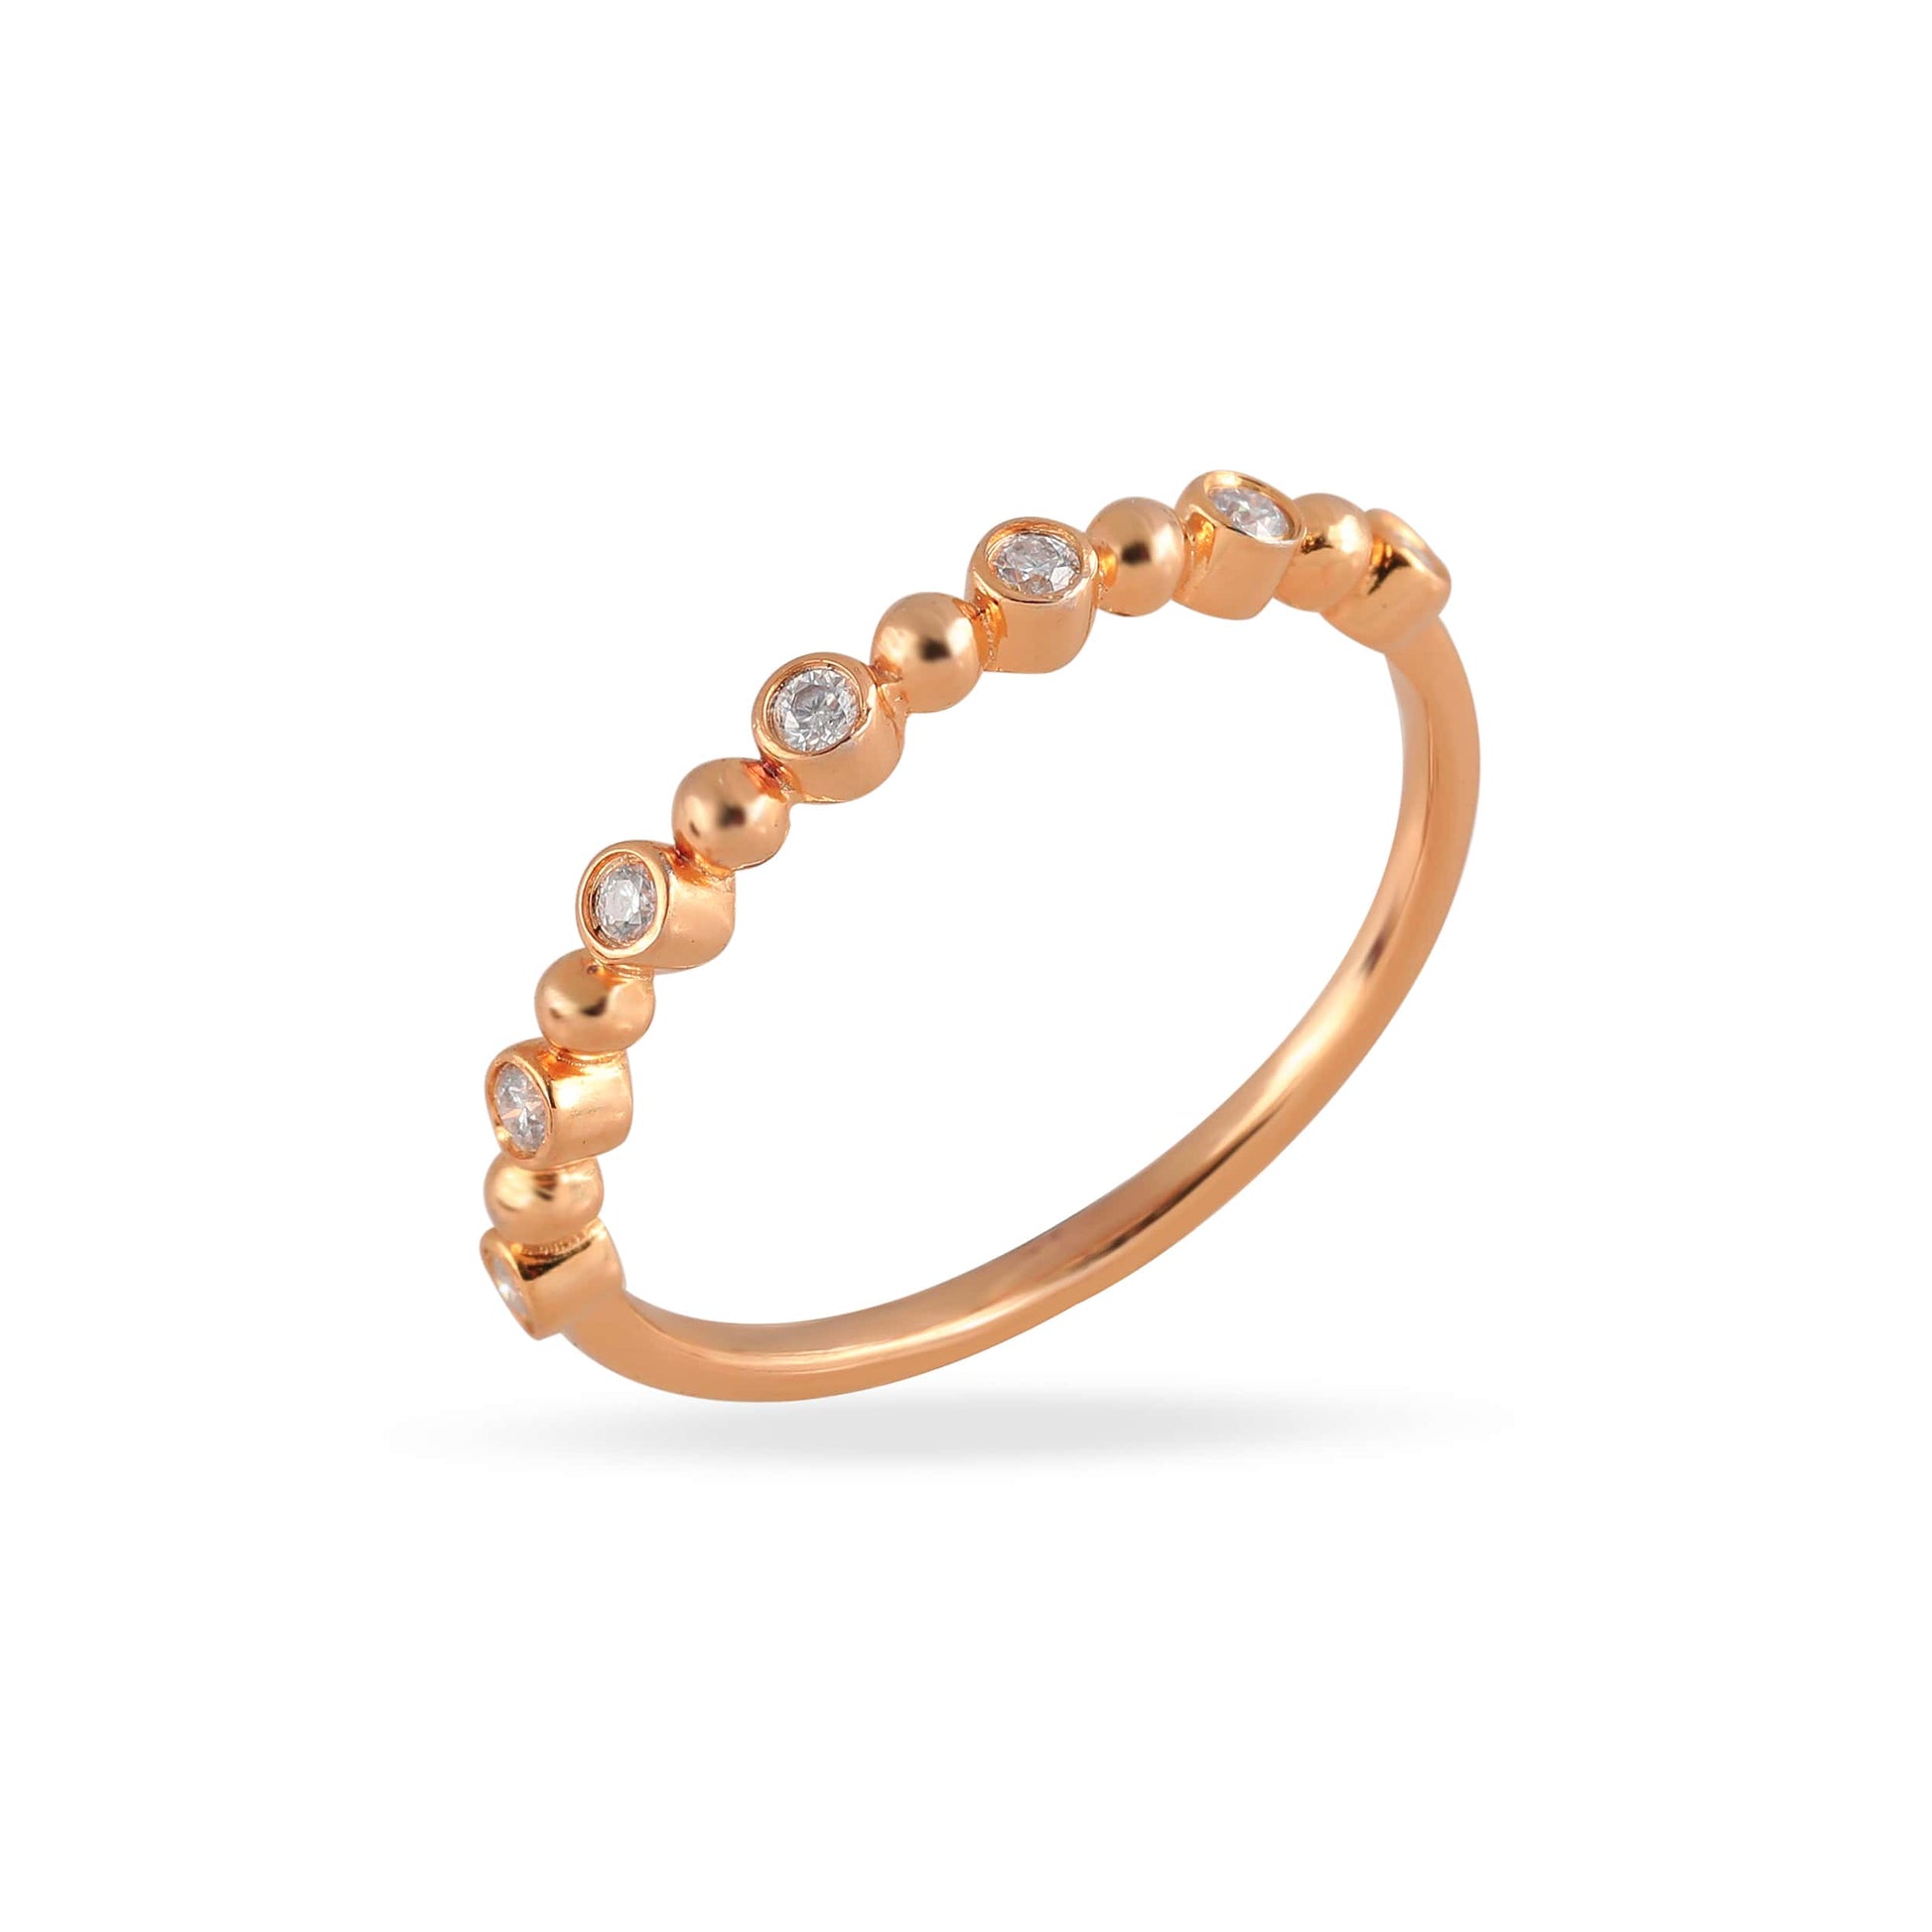 Diamond and gold beaded ring in rose gold